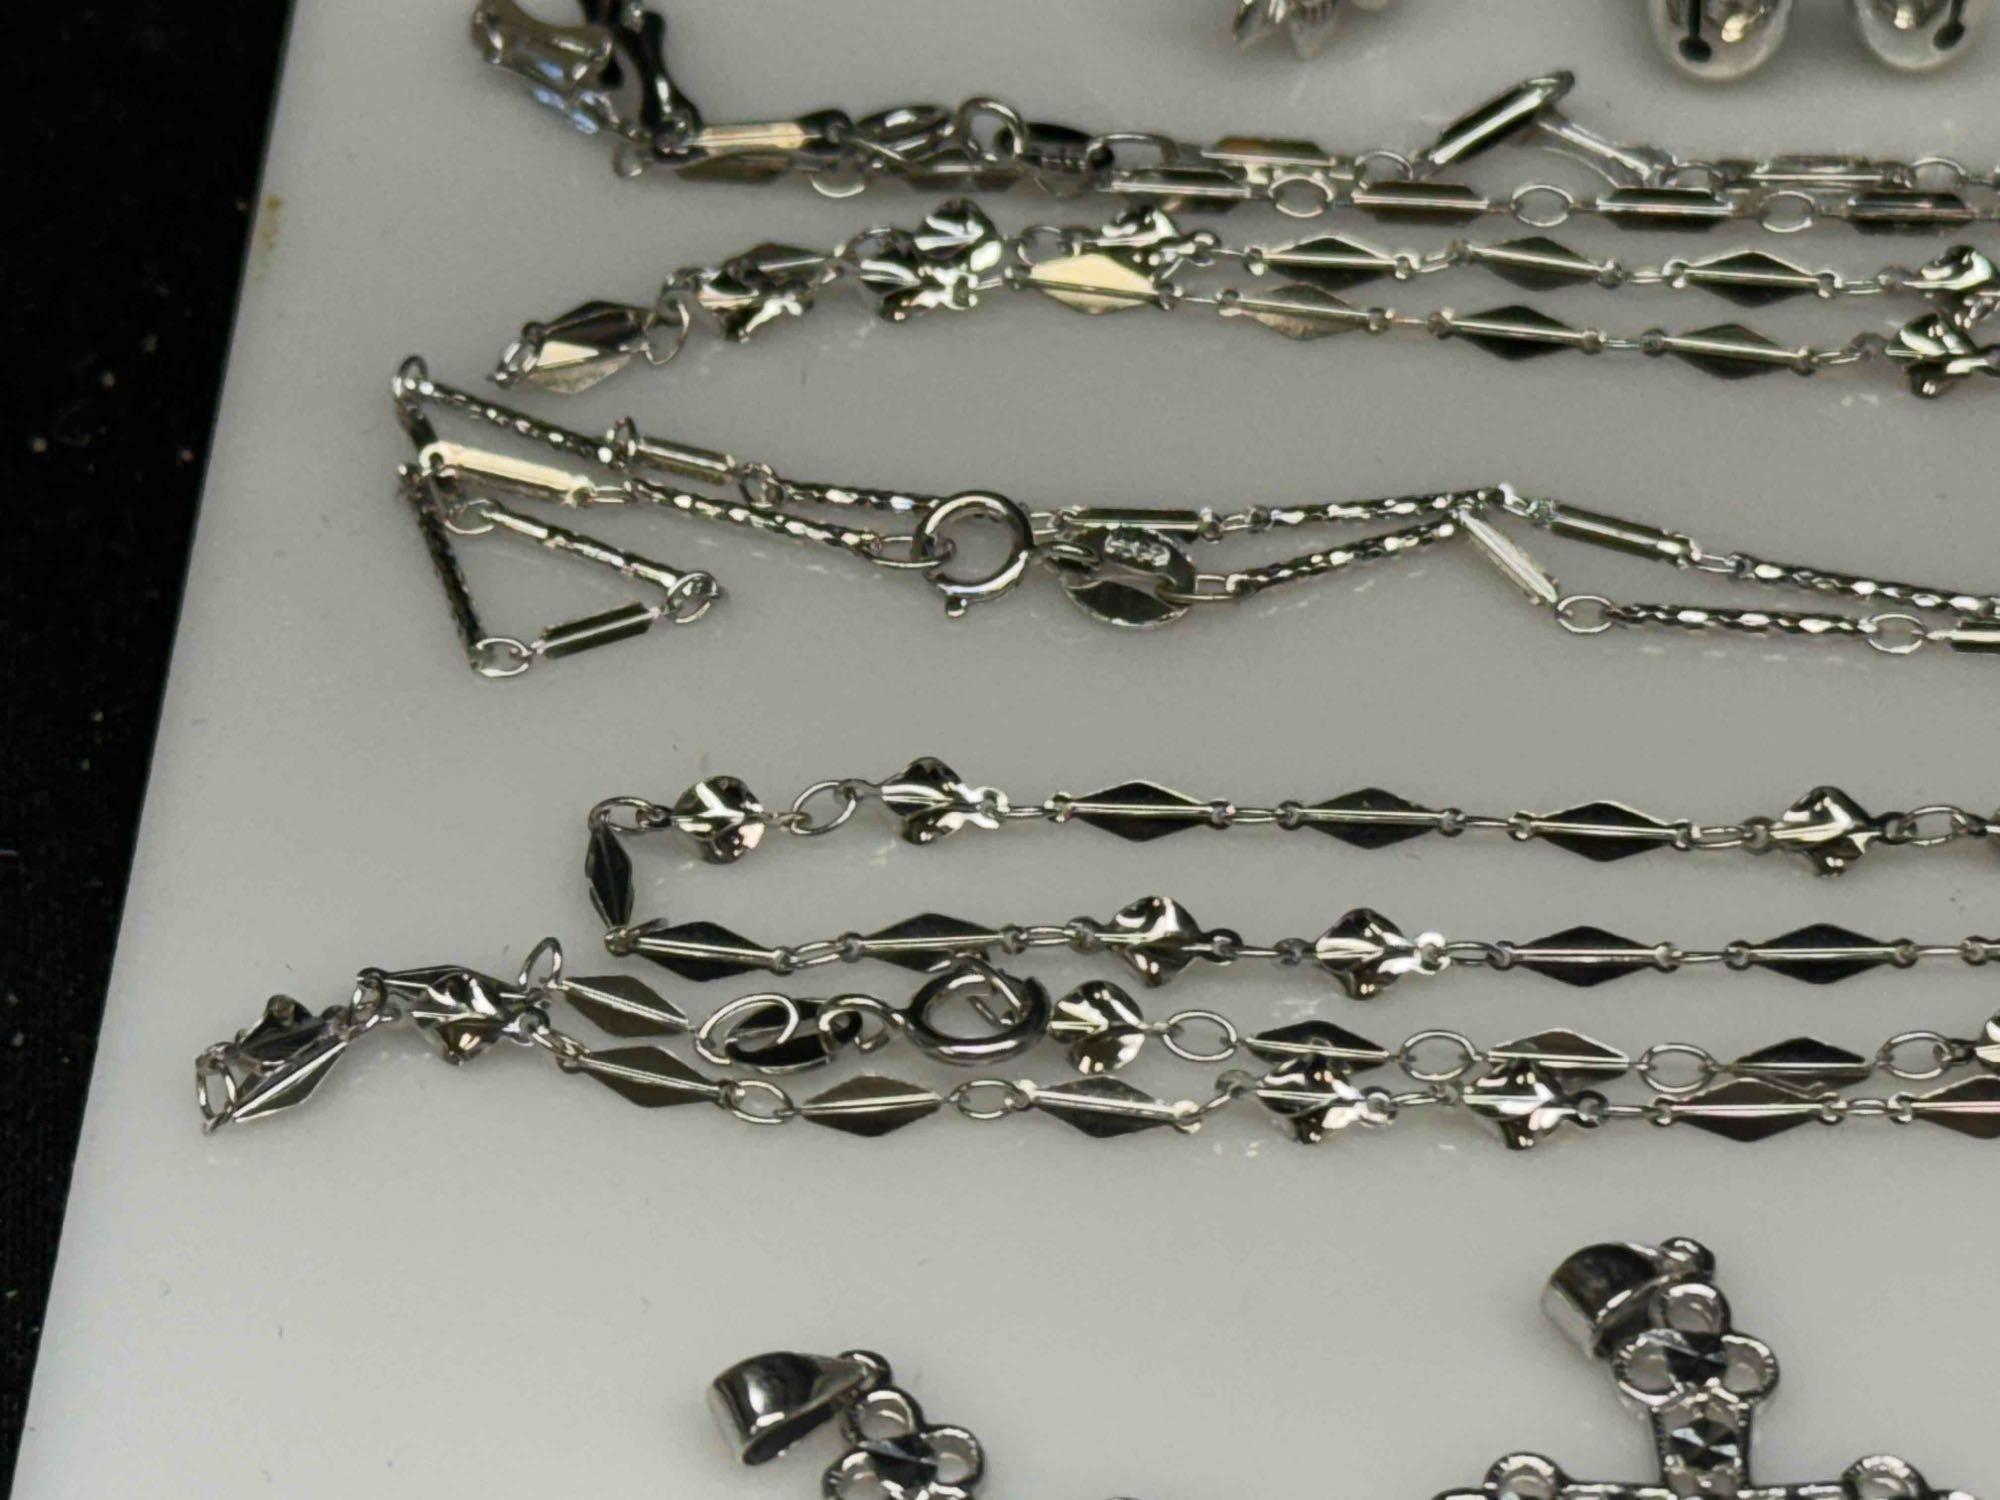 Assorted S925 Sterling Silver Jewelry Rings, Pendants, Necklaces more 28g total